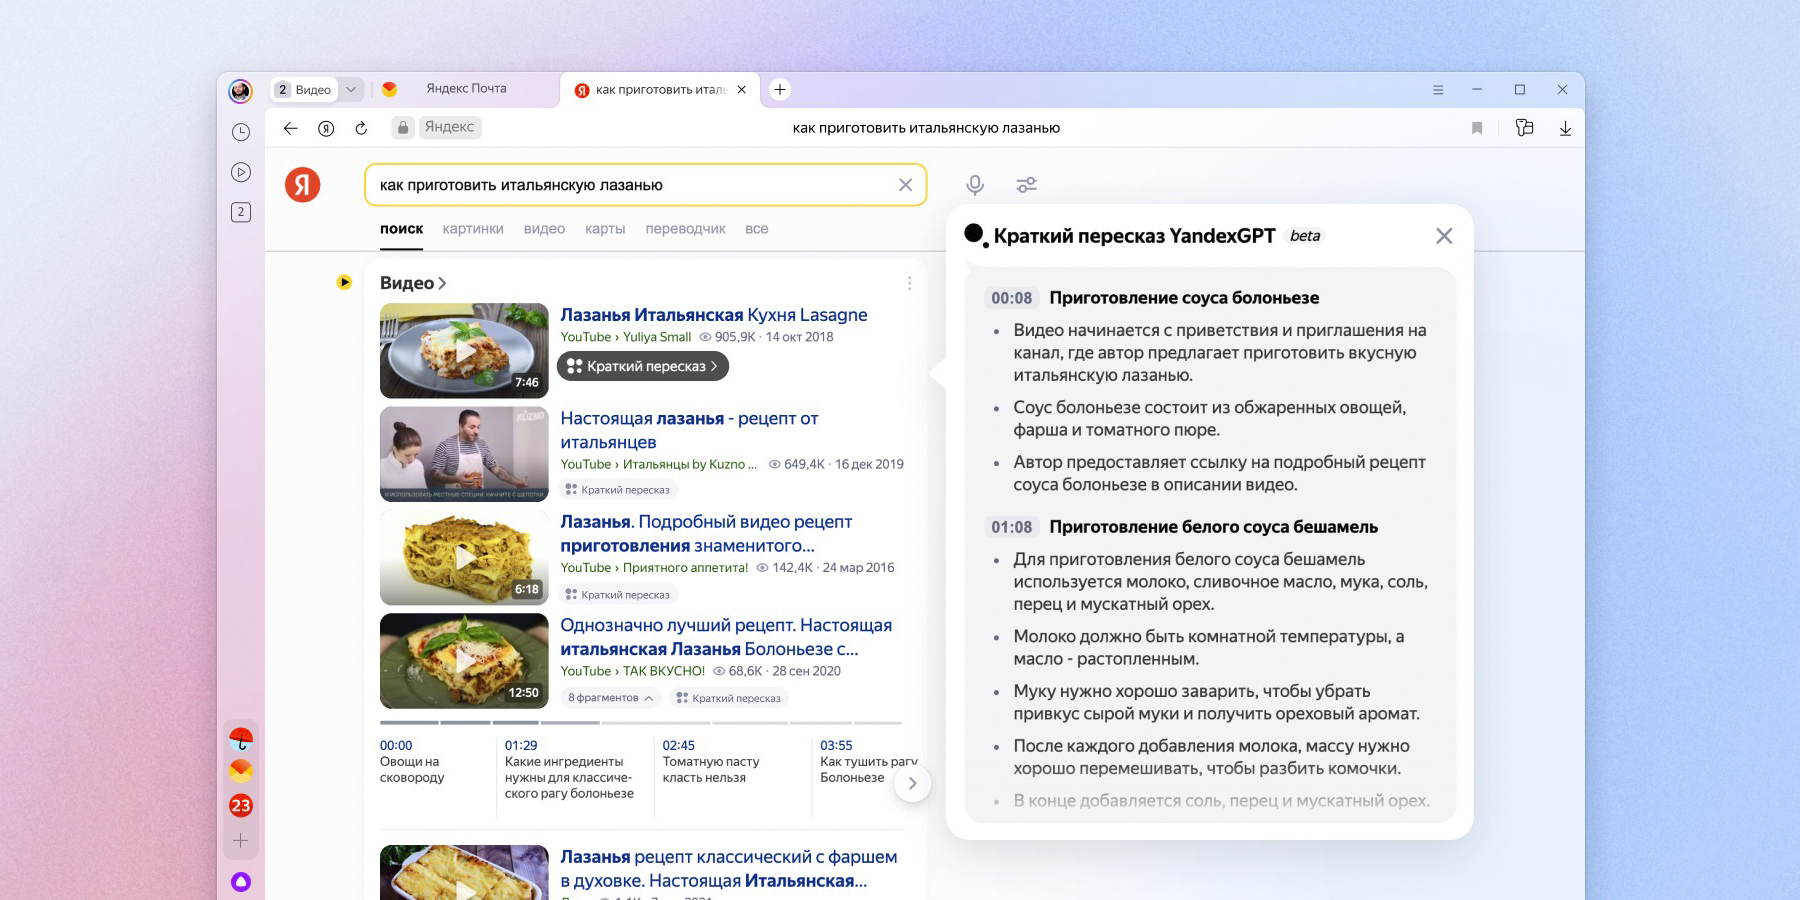 Yandex Browser has learned how to briefly retell videos